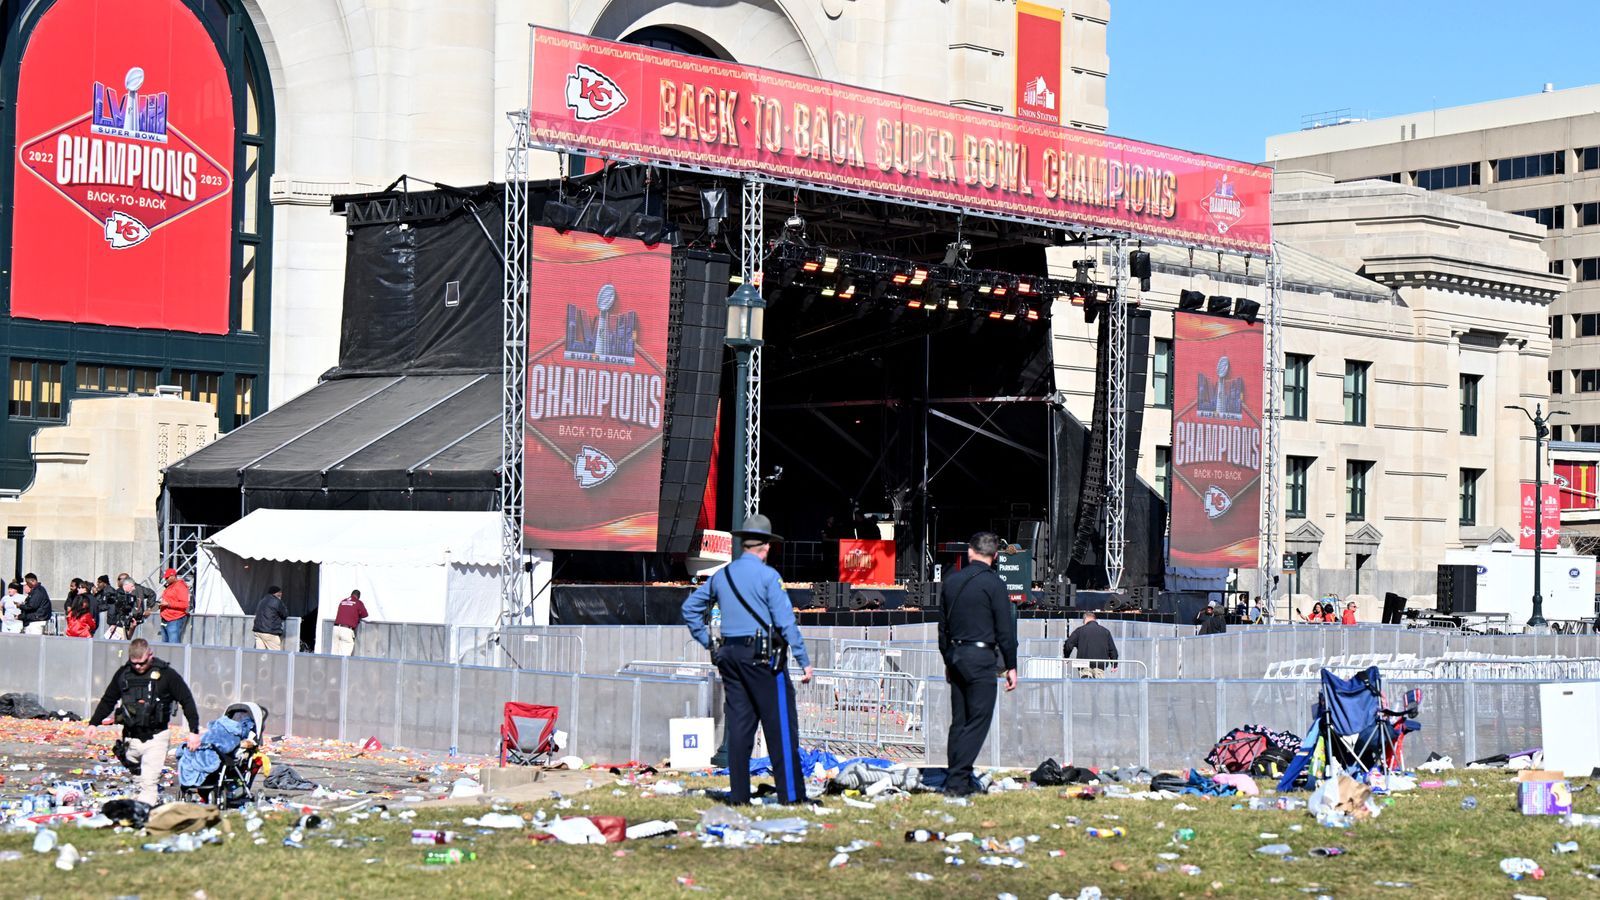 Kansas City Chiefs: Two arrested over Super Bowl parade shooting are children and more than half of victims under 16